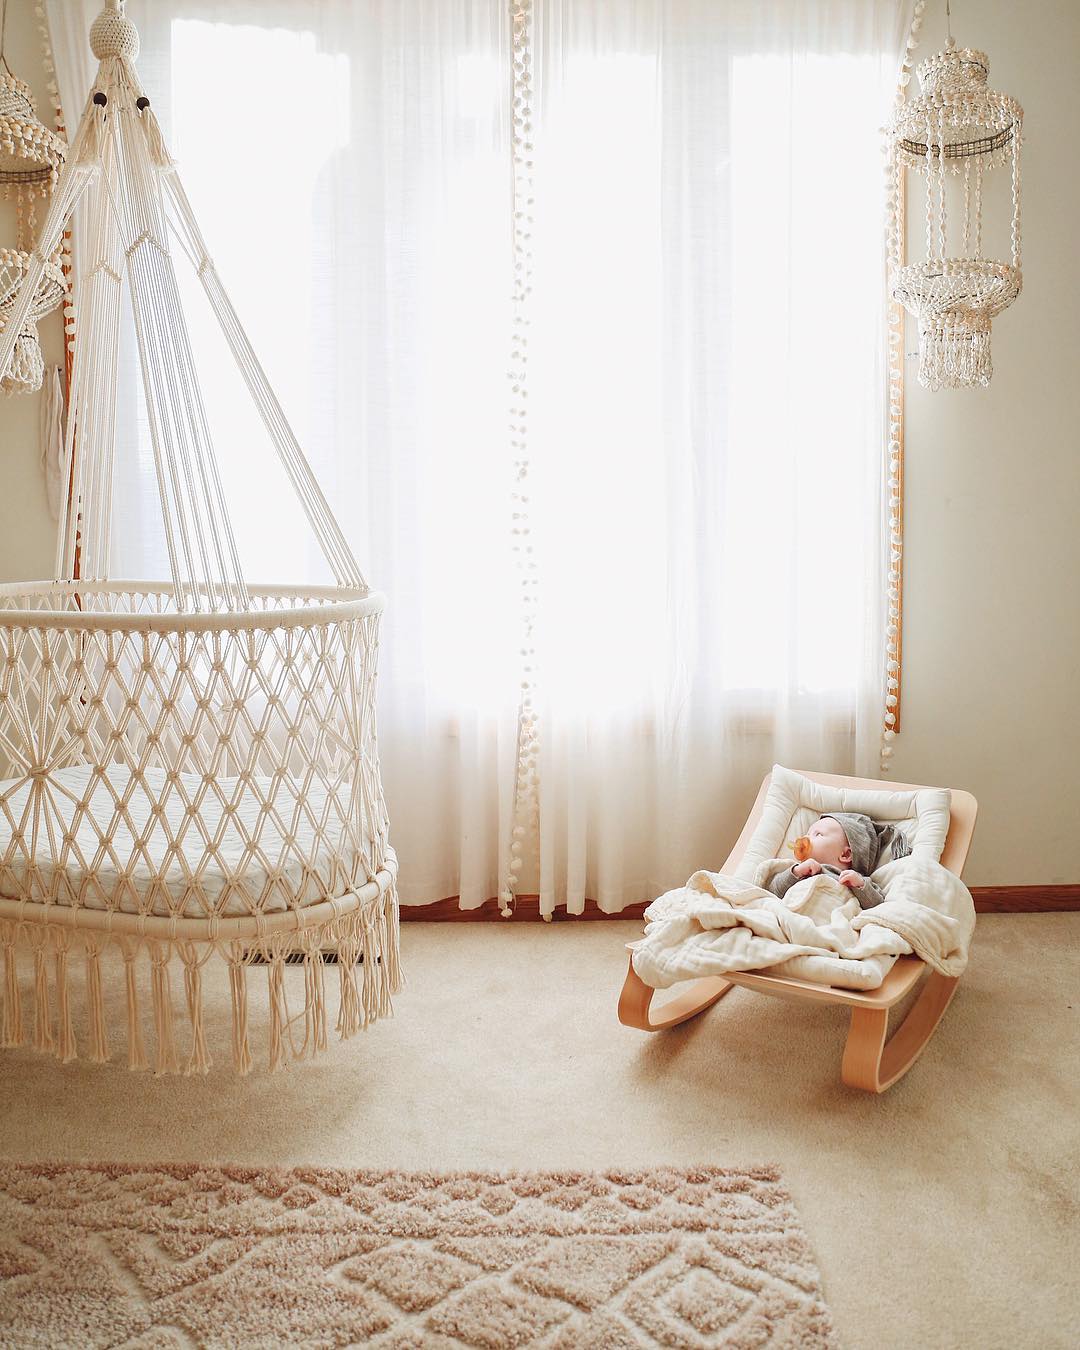 baby rocking chair next to a hanging cradle